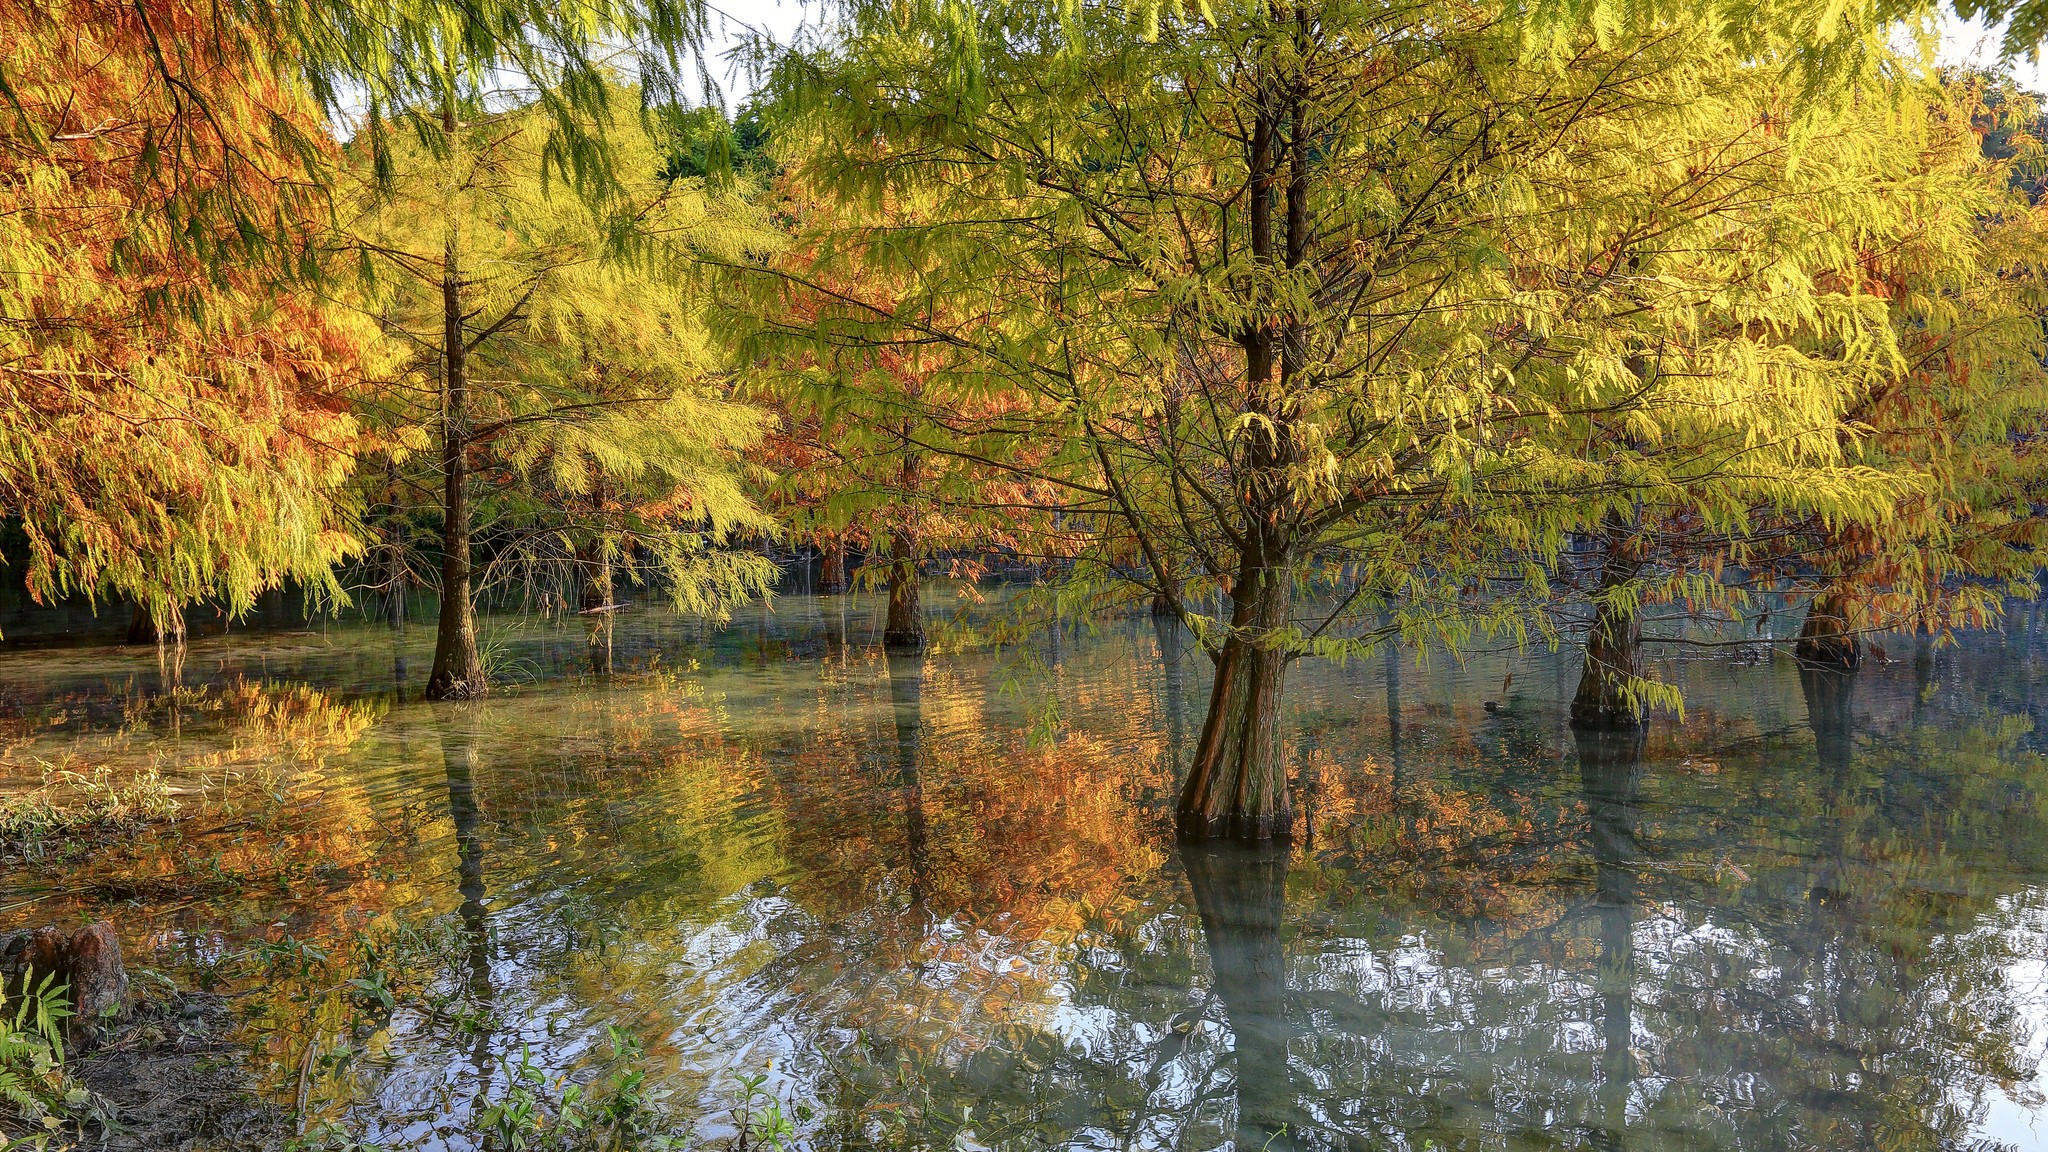 General 2048x1152 water nature trees reflection